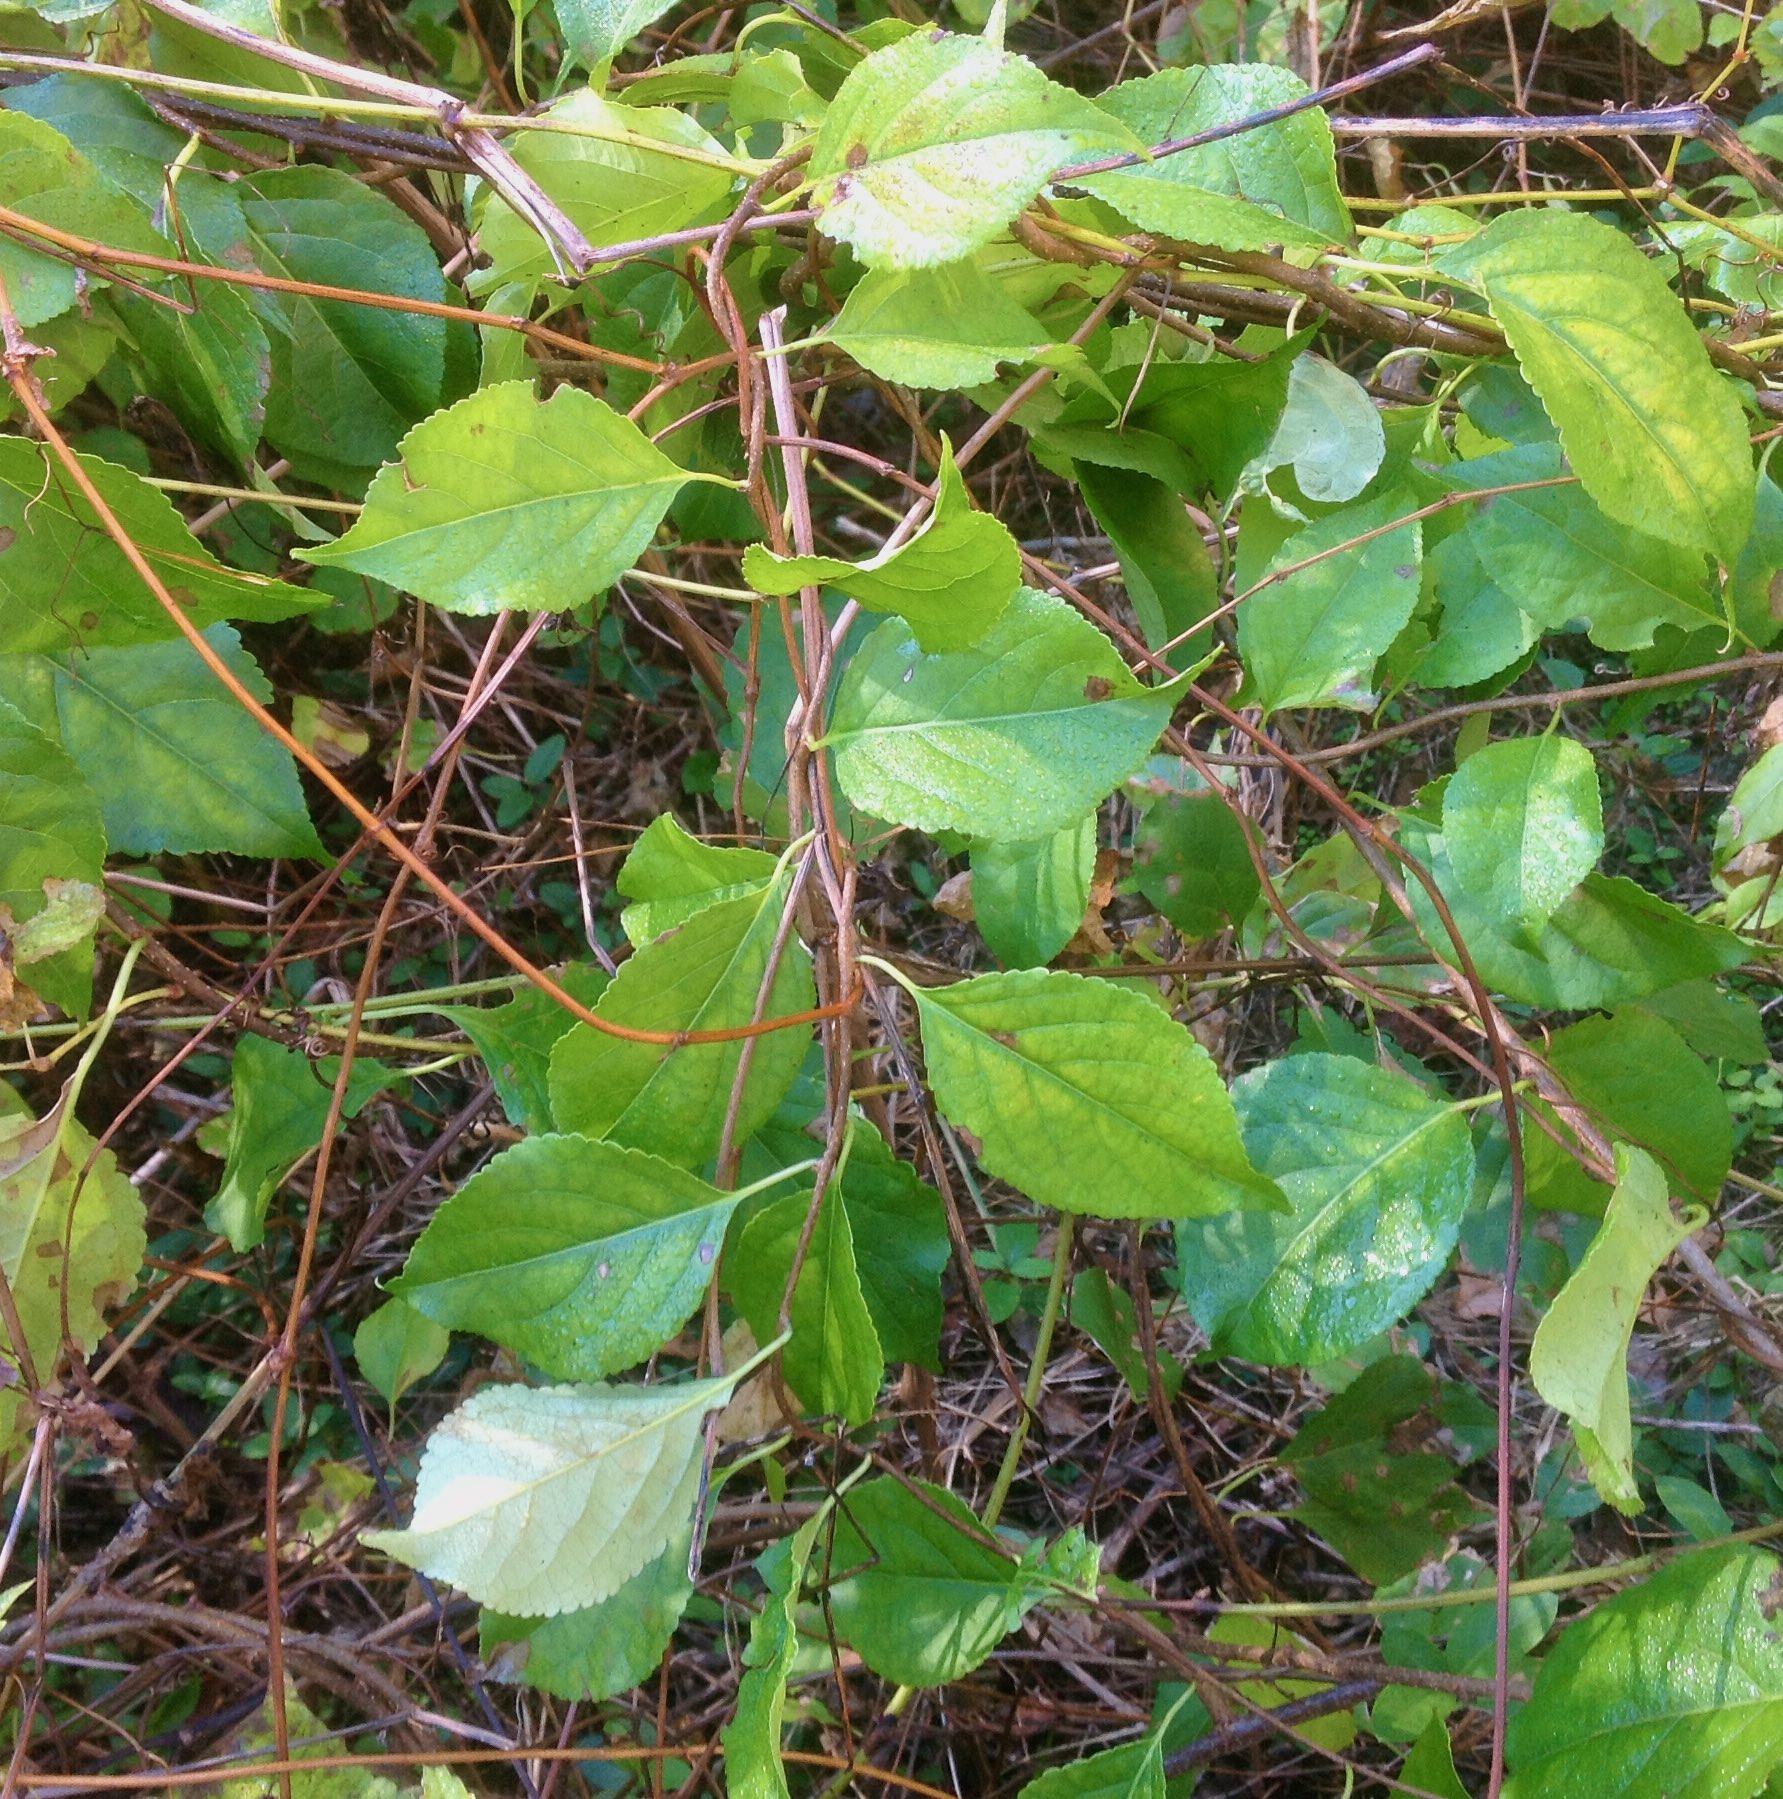 The Scientific Name is Celastrus orbiculatus. You will likely hear them called Oriental Bittersweet. This picture shows the Twining vine with alternate, shallowly toothed leaves that often come to an abrupt tip. Stems and roots often orange. of Celastrus orbiculatus